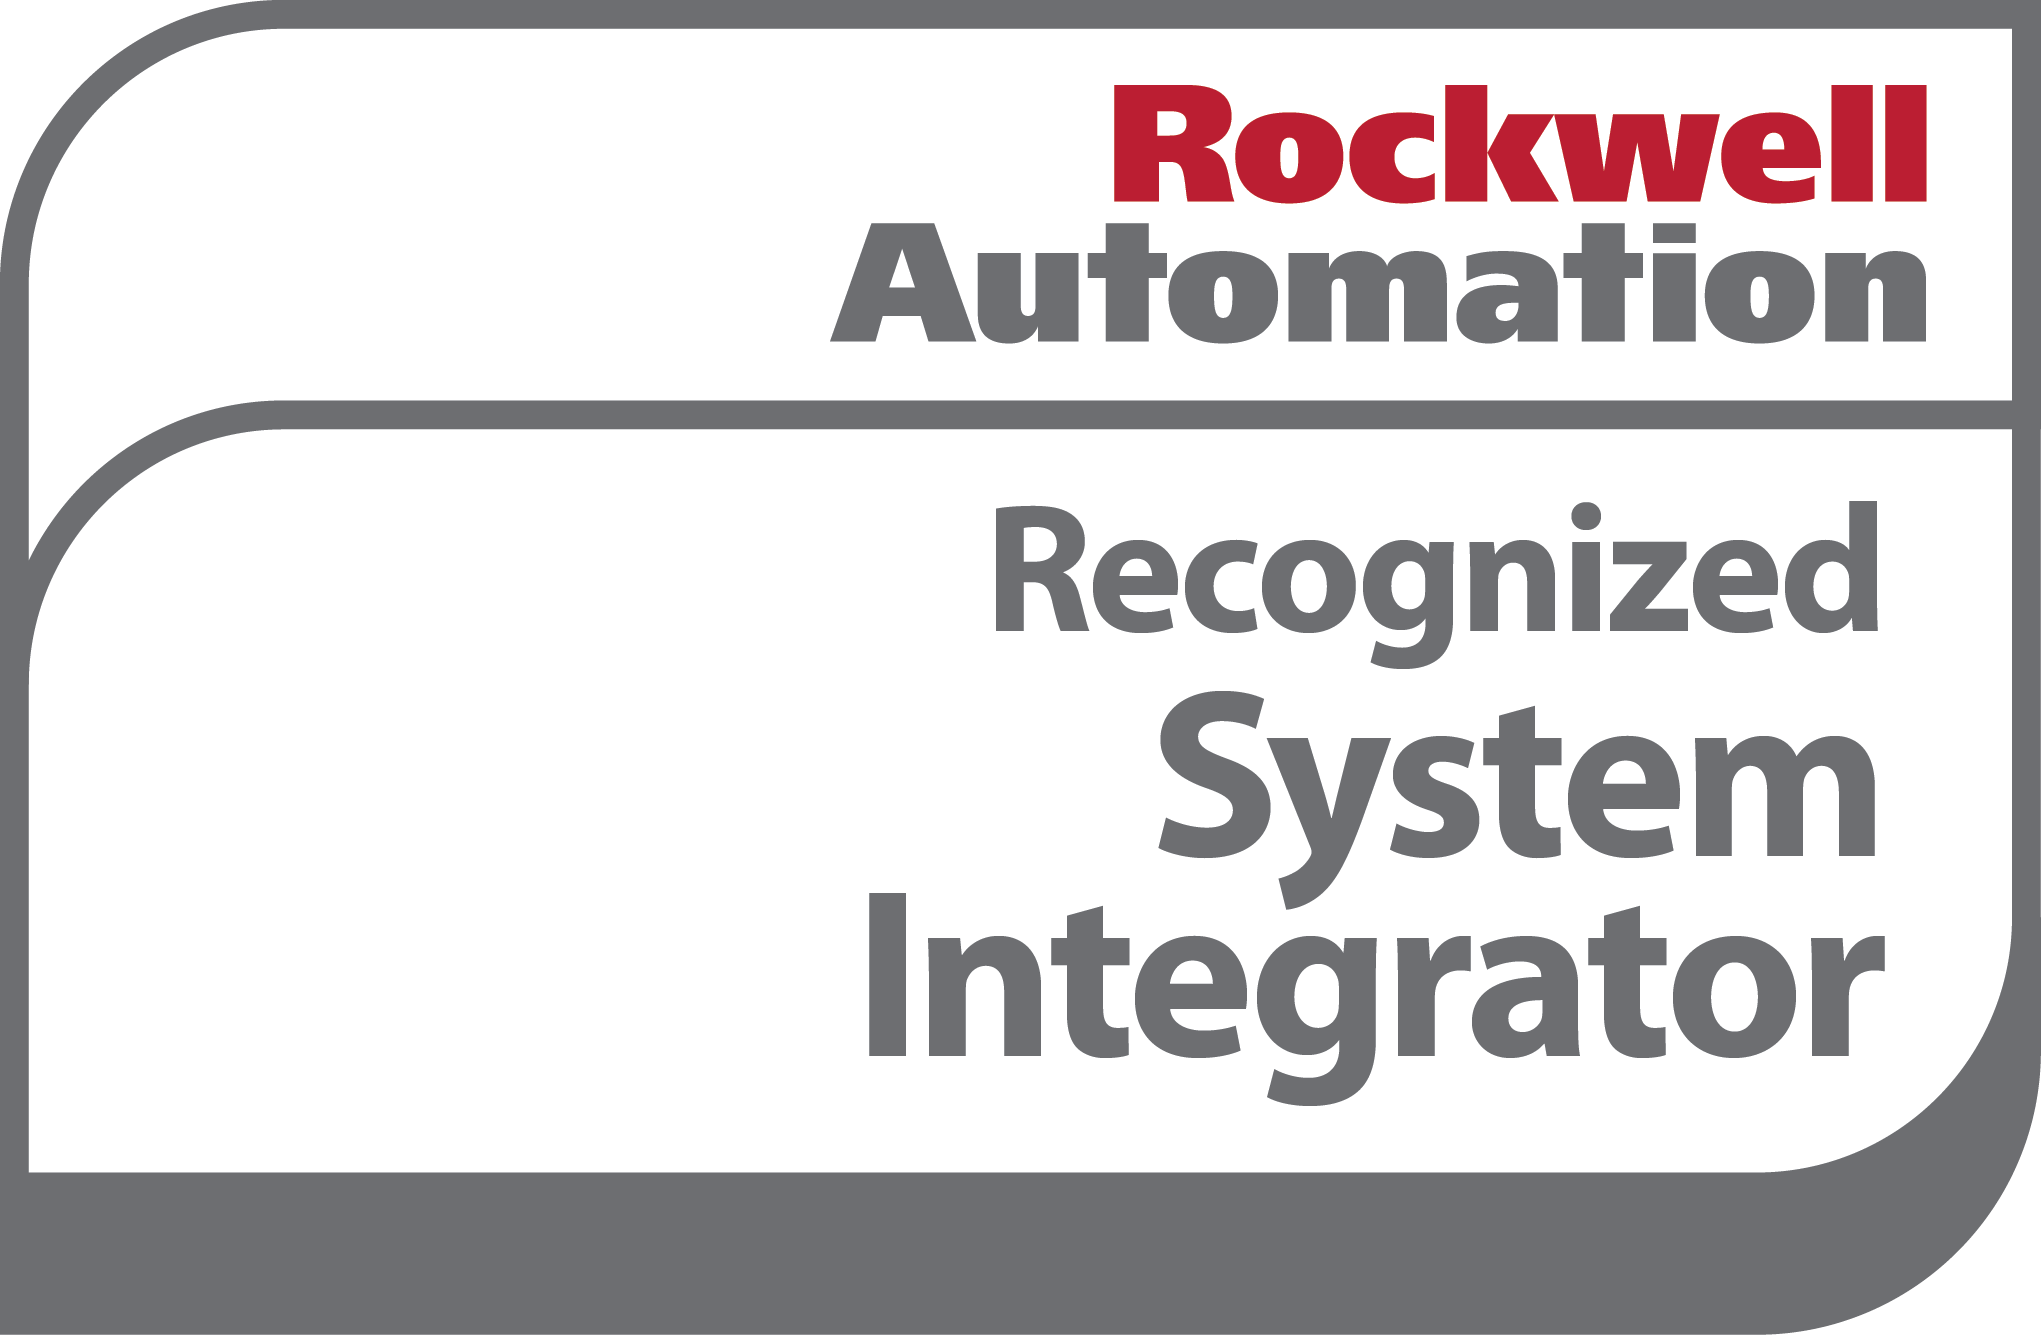 Applied Manufacturing Technologies Rockwell Automation Recognized System Integrator logo